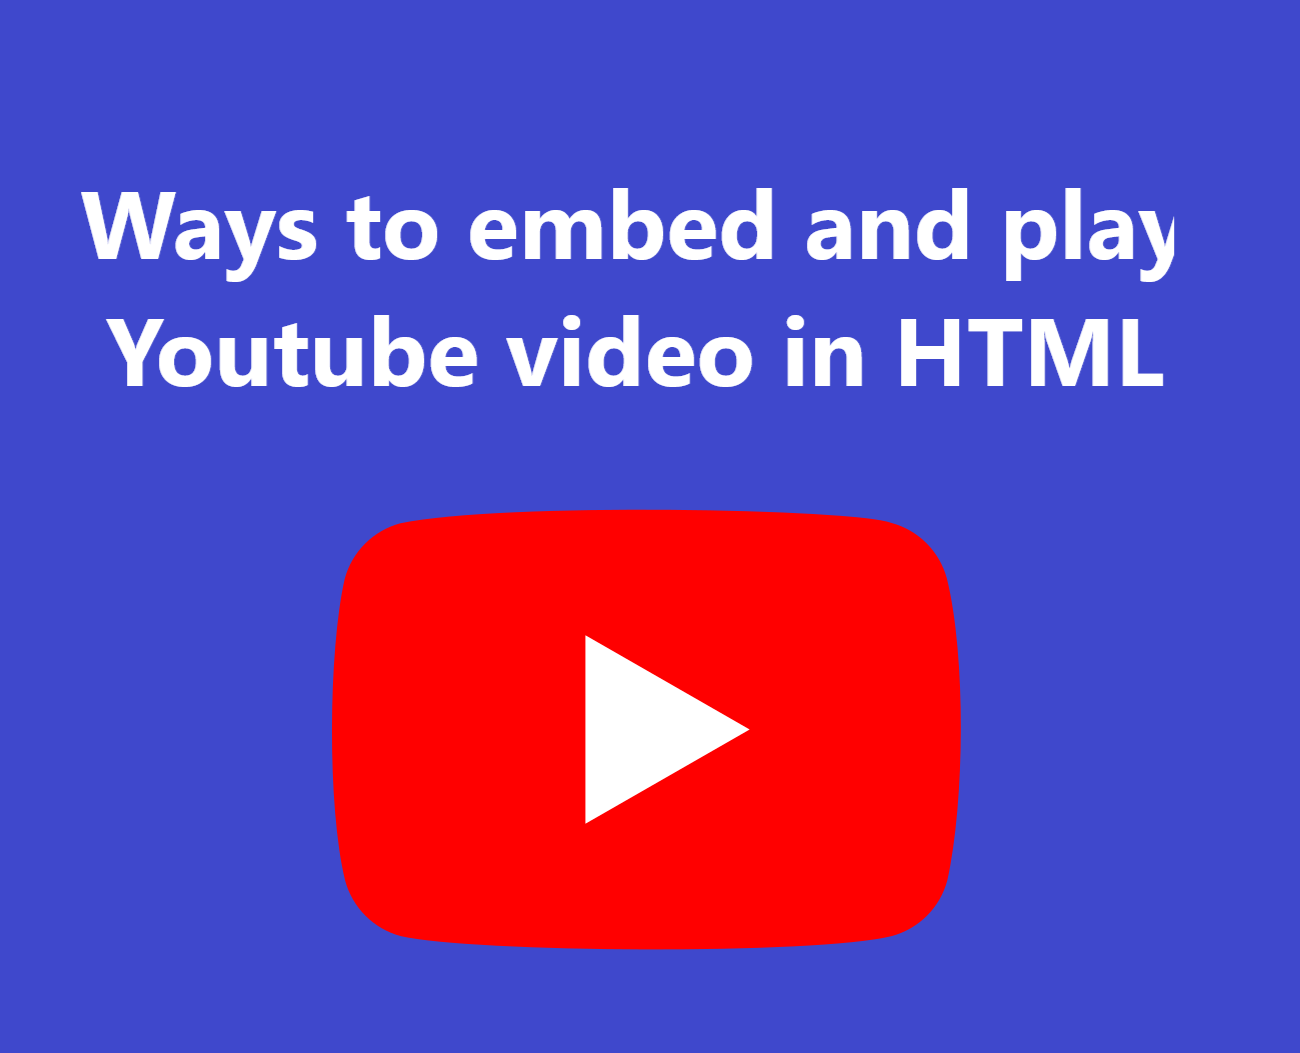 Ways to embed and play Youtube video in HTML